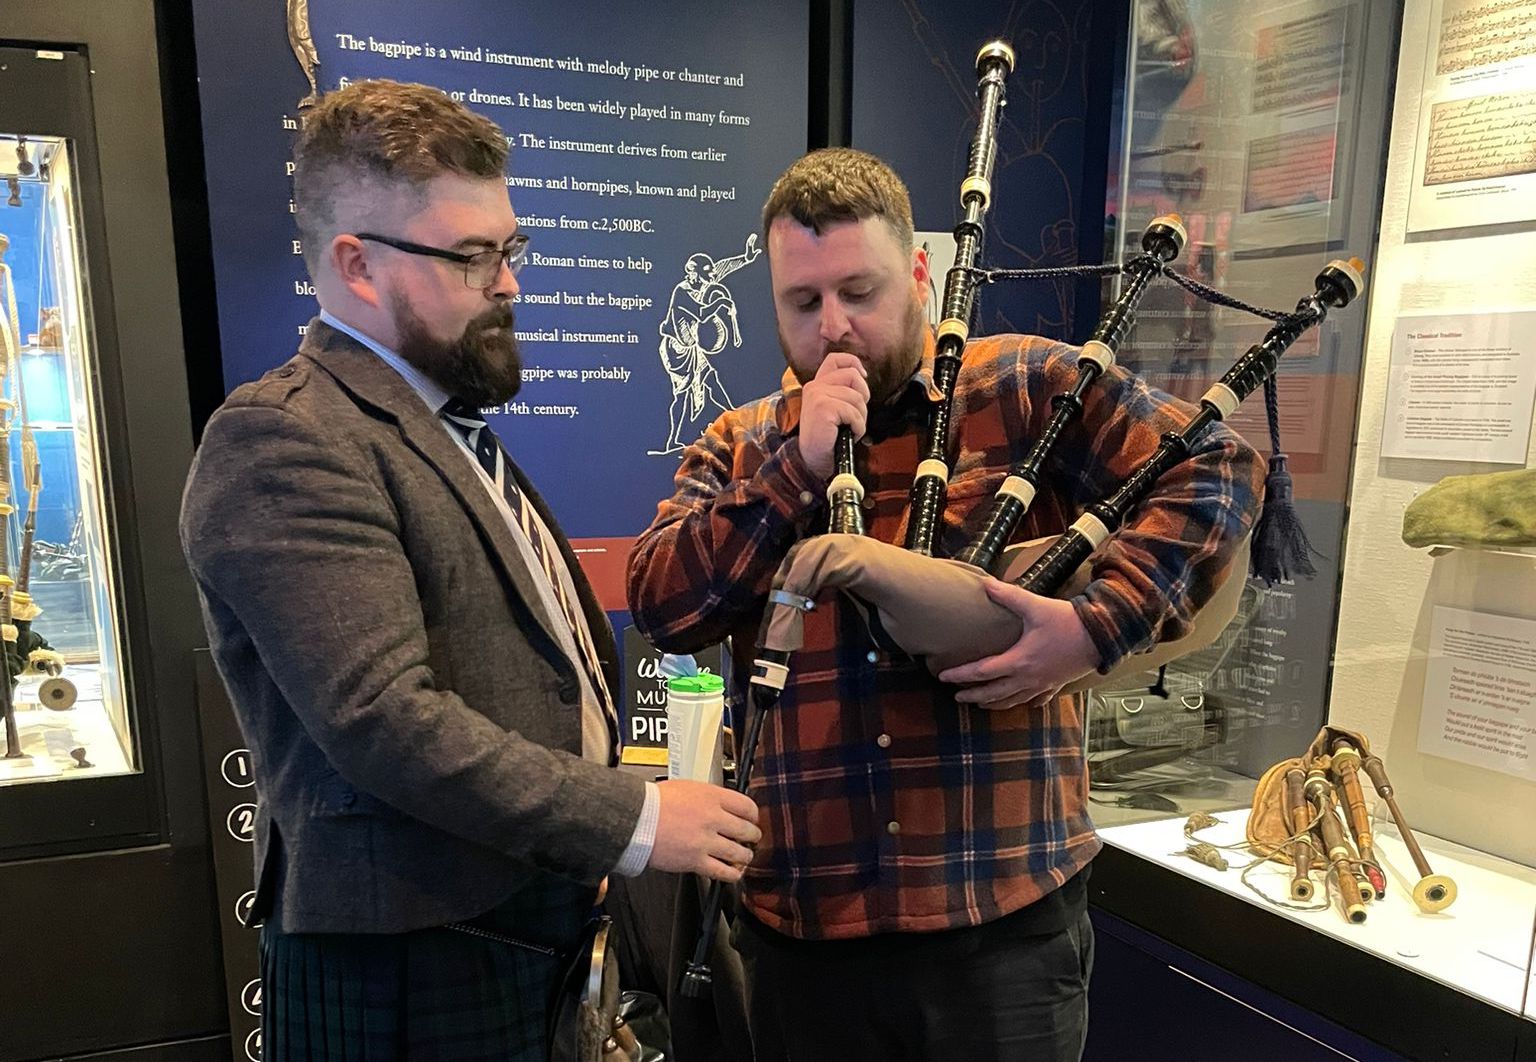 Give the bagpipes a go at the National Piping Centre